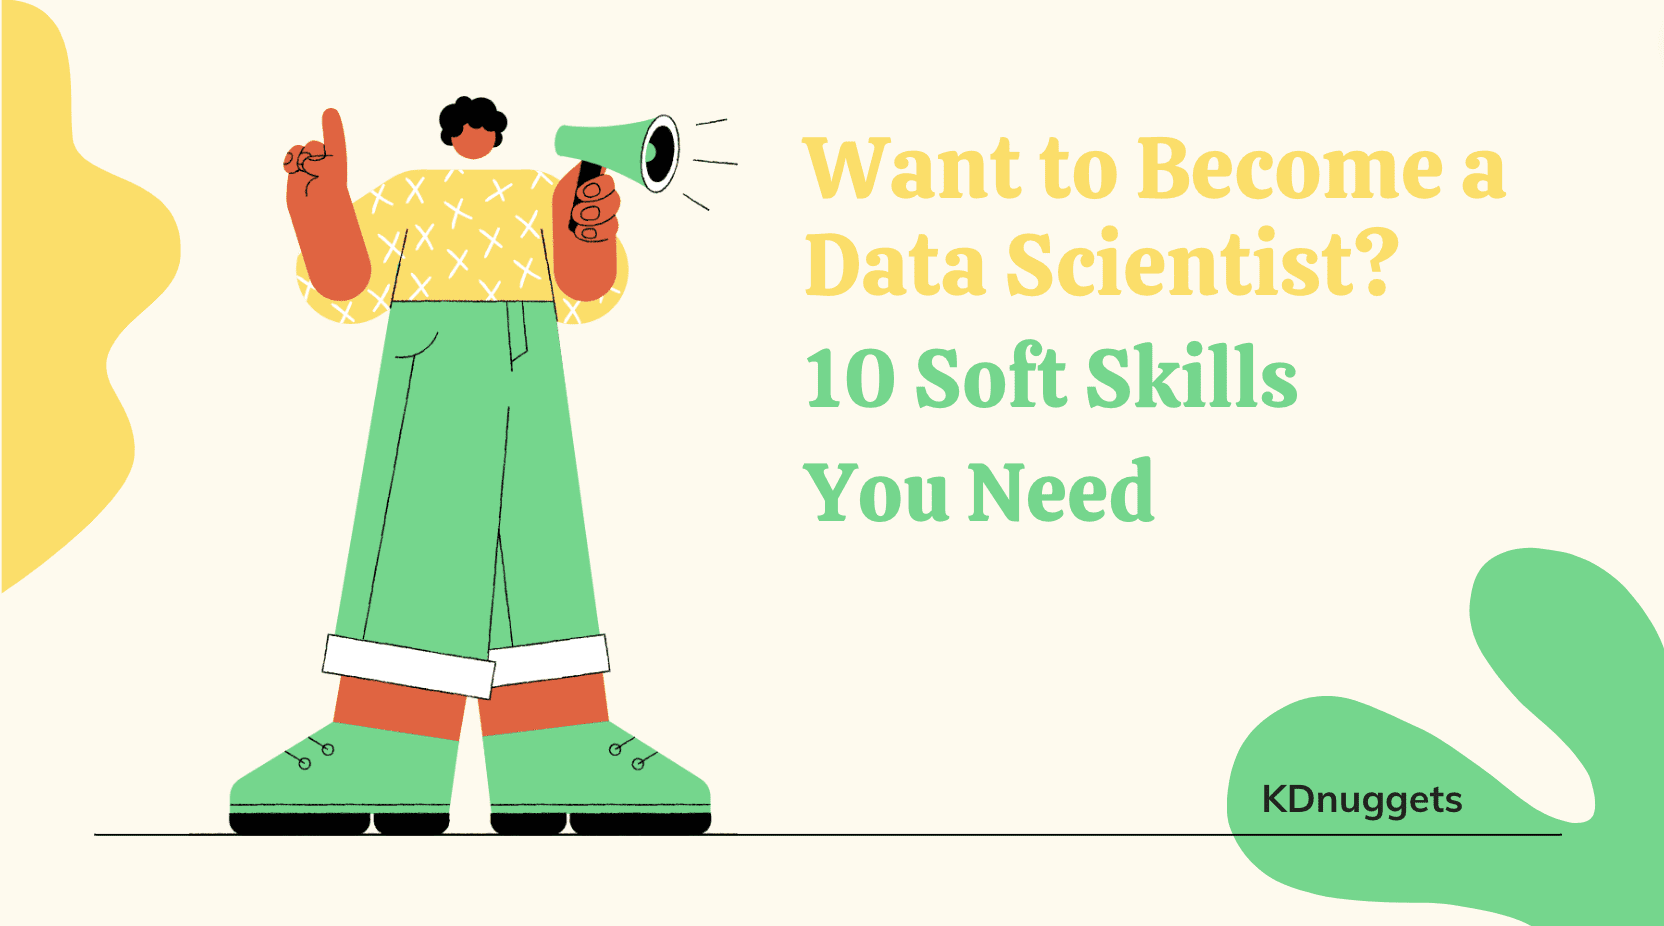 Do you want to become a Data Scientist?  Part 2: 10 Soft Skills You Need